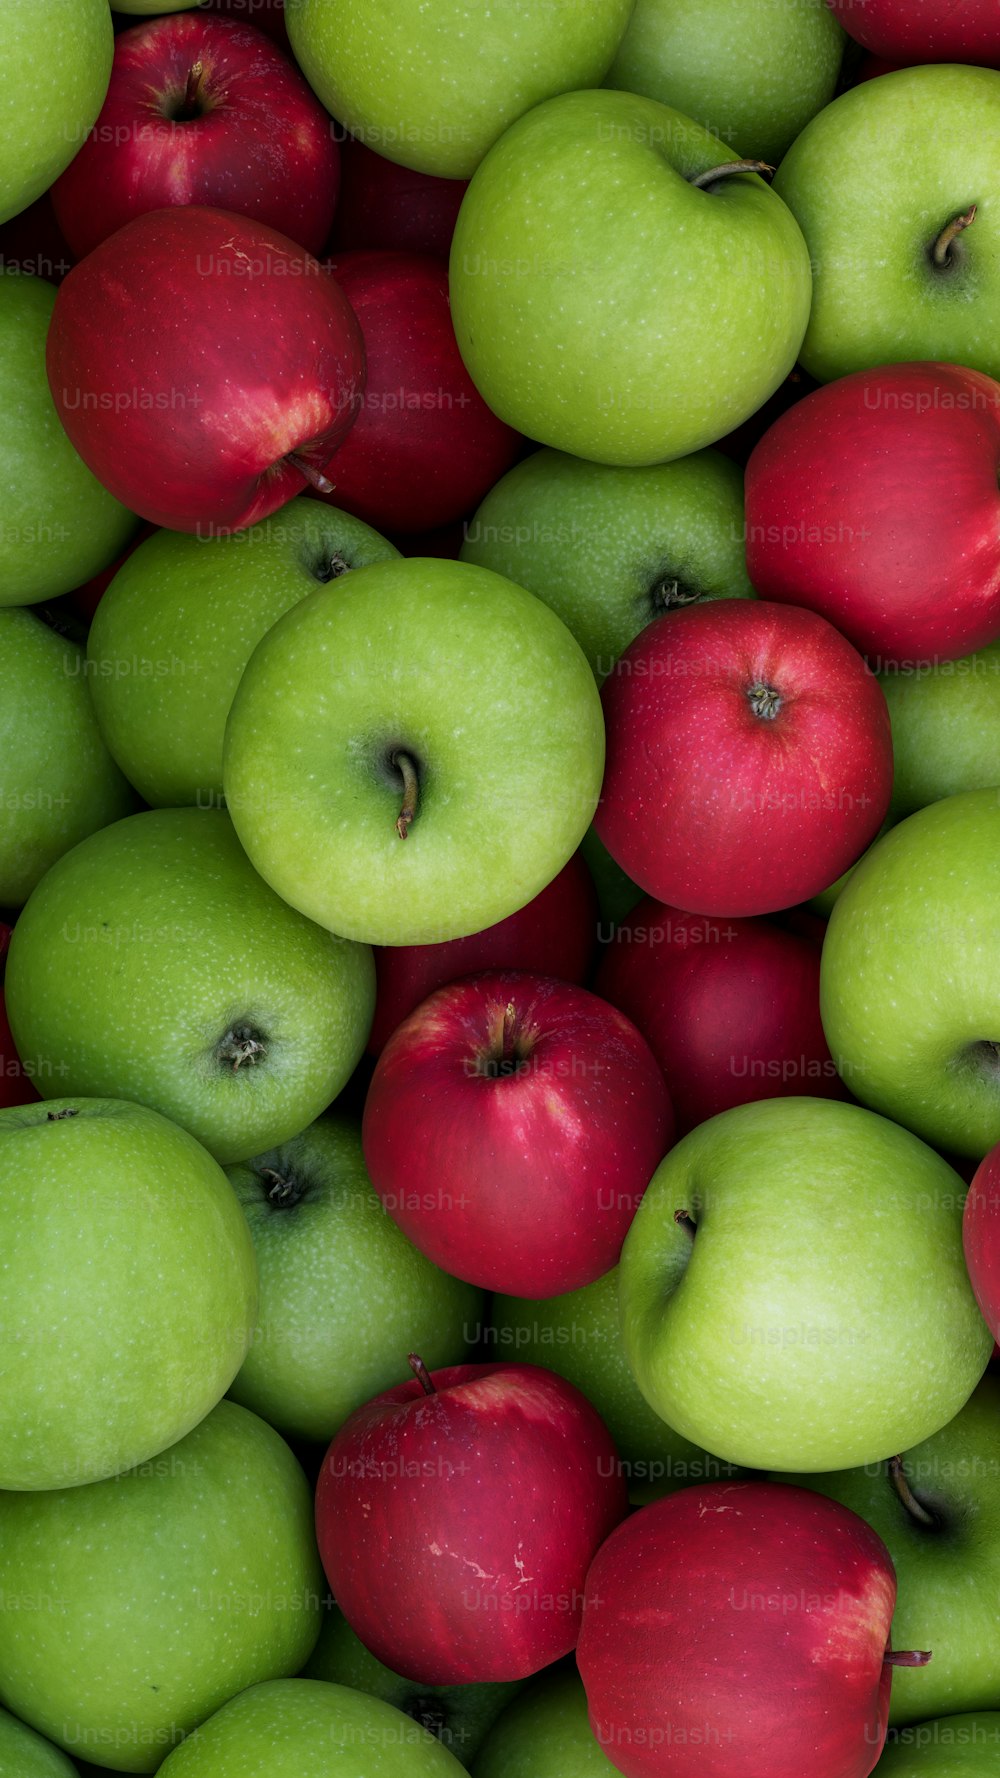 a pile of green and red apples sitting next to each other